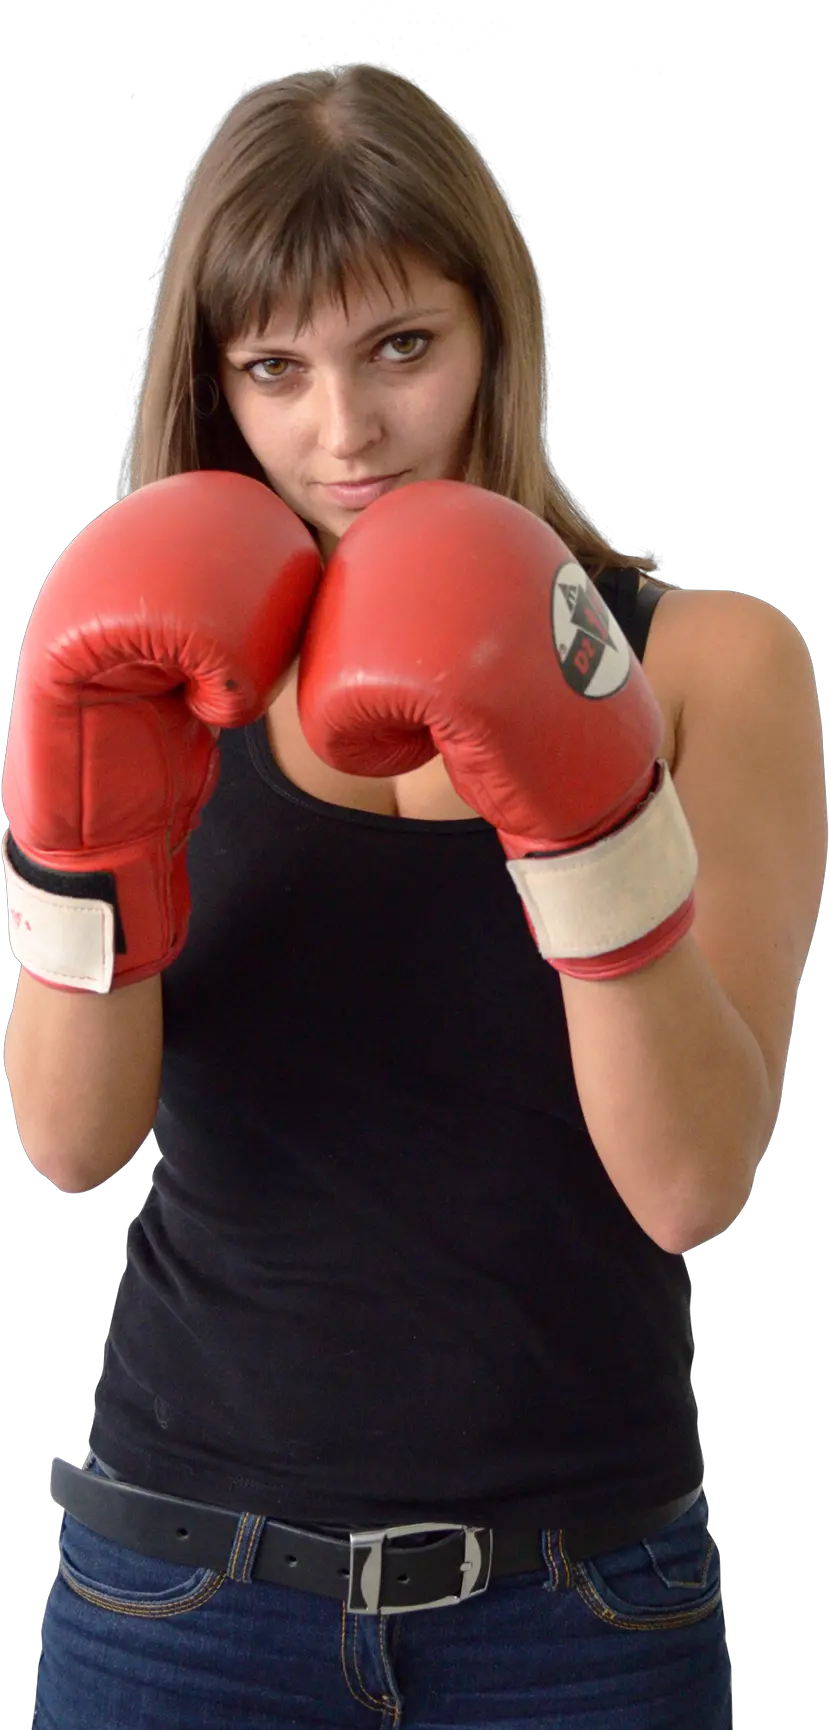 Download Female Boxer Png Image For Free Female Boxer Png Boxer Png